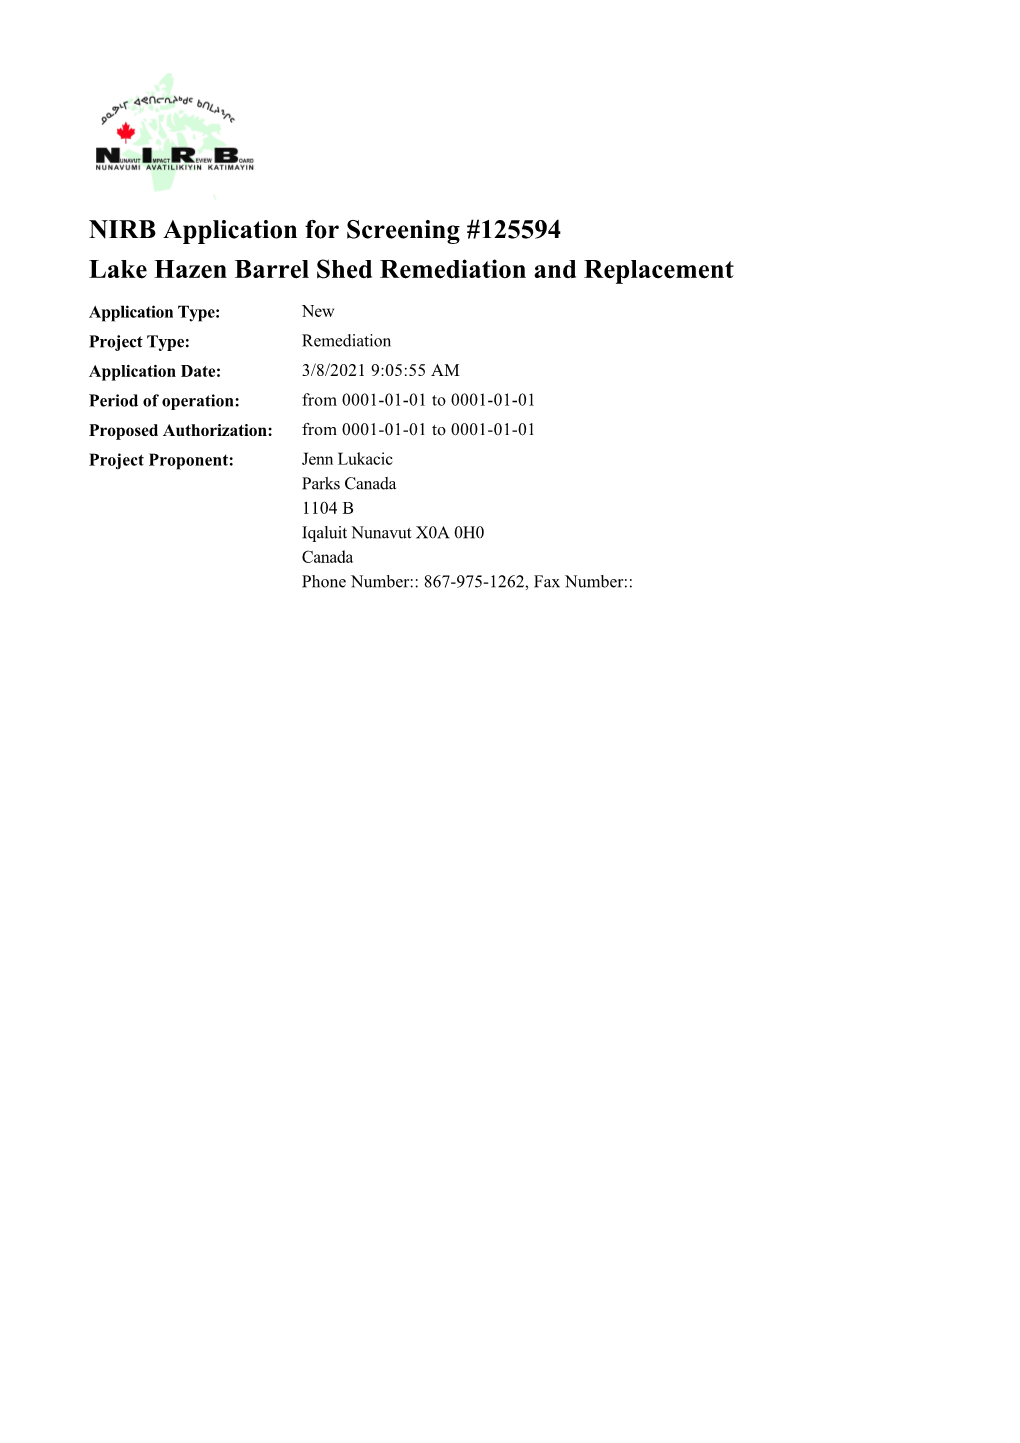 NIRB Application for Screening #125594 Lake Hazen Barrel Shed Remediation and Replacement